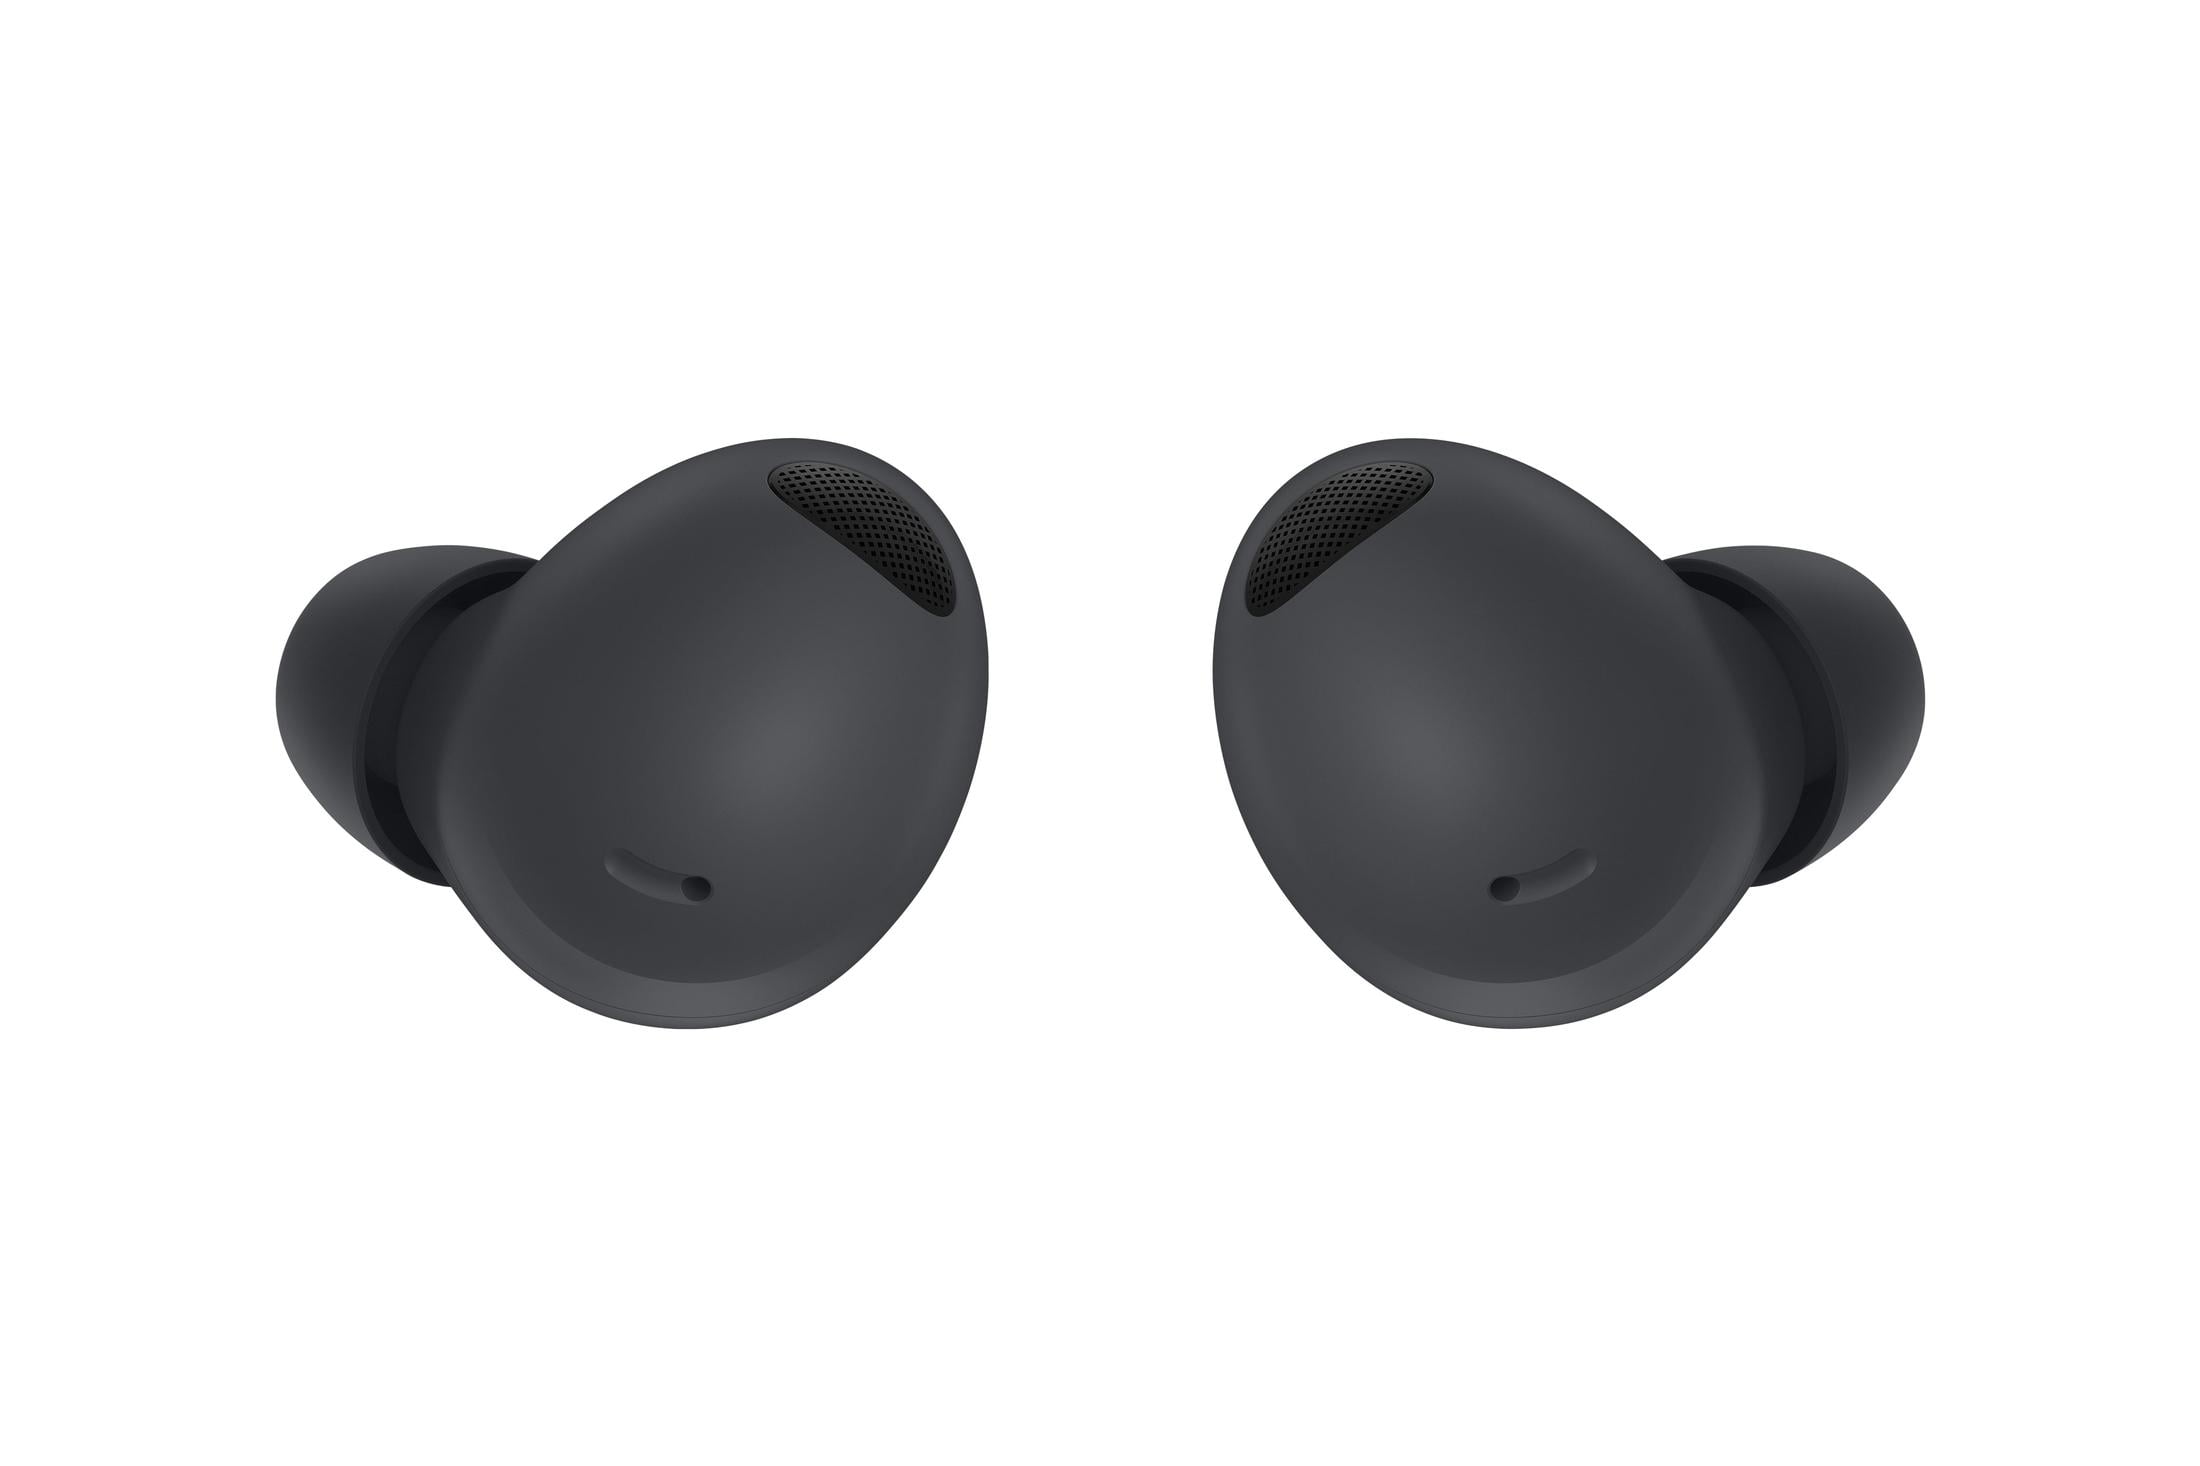 Samsung Galaxy Buds 2 Pro Review: Best Galaxy Buds Yet - Video - CNET